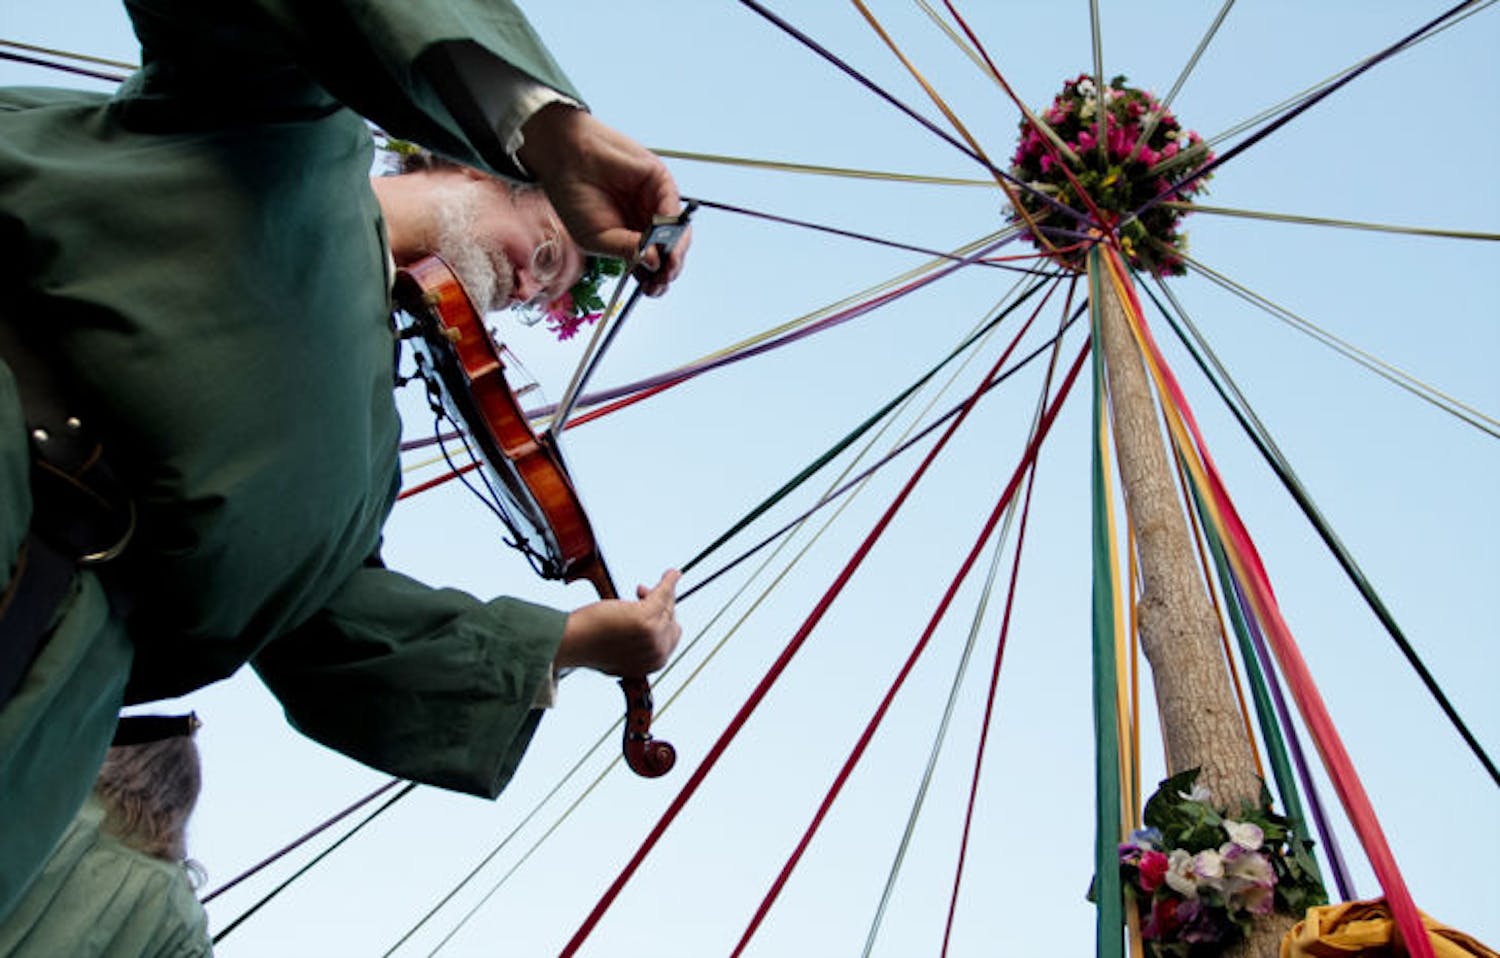 Richard Crew plays the violin underneath a maypole at the Hoggetowne Medieval Faire on Sunday. Crew is part of the Greenwood Morris dance group, a group that organizes dances and plays under the maypole. He said he has been playing the violin and attending various medieval fairs for about 20 years.